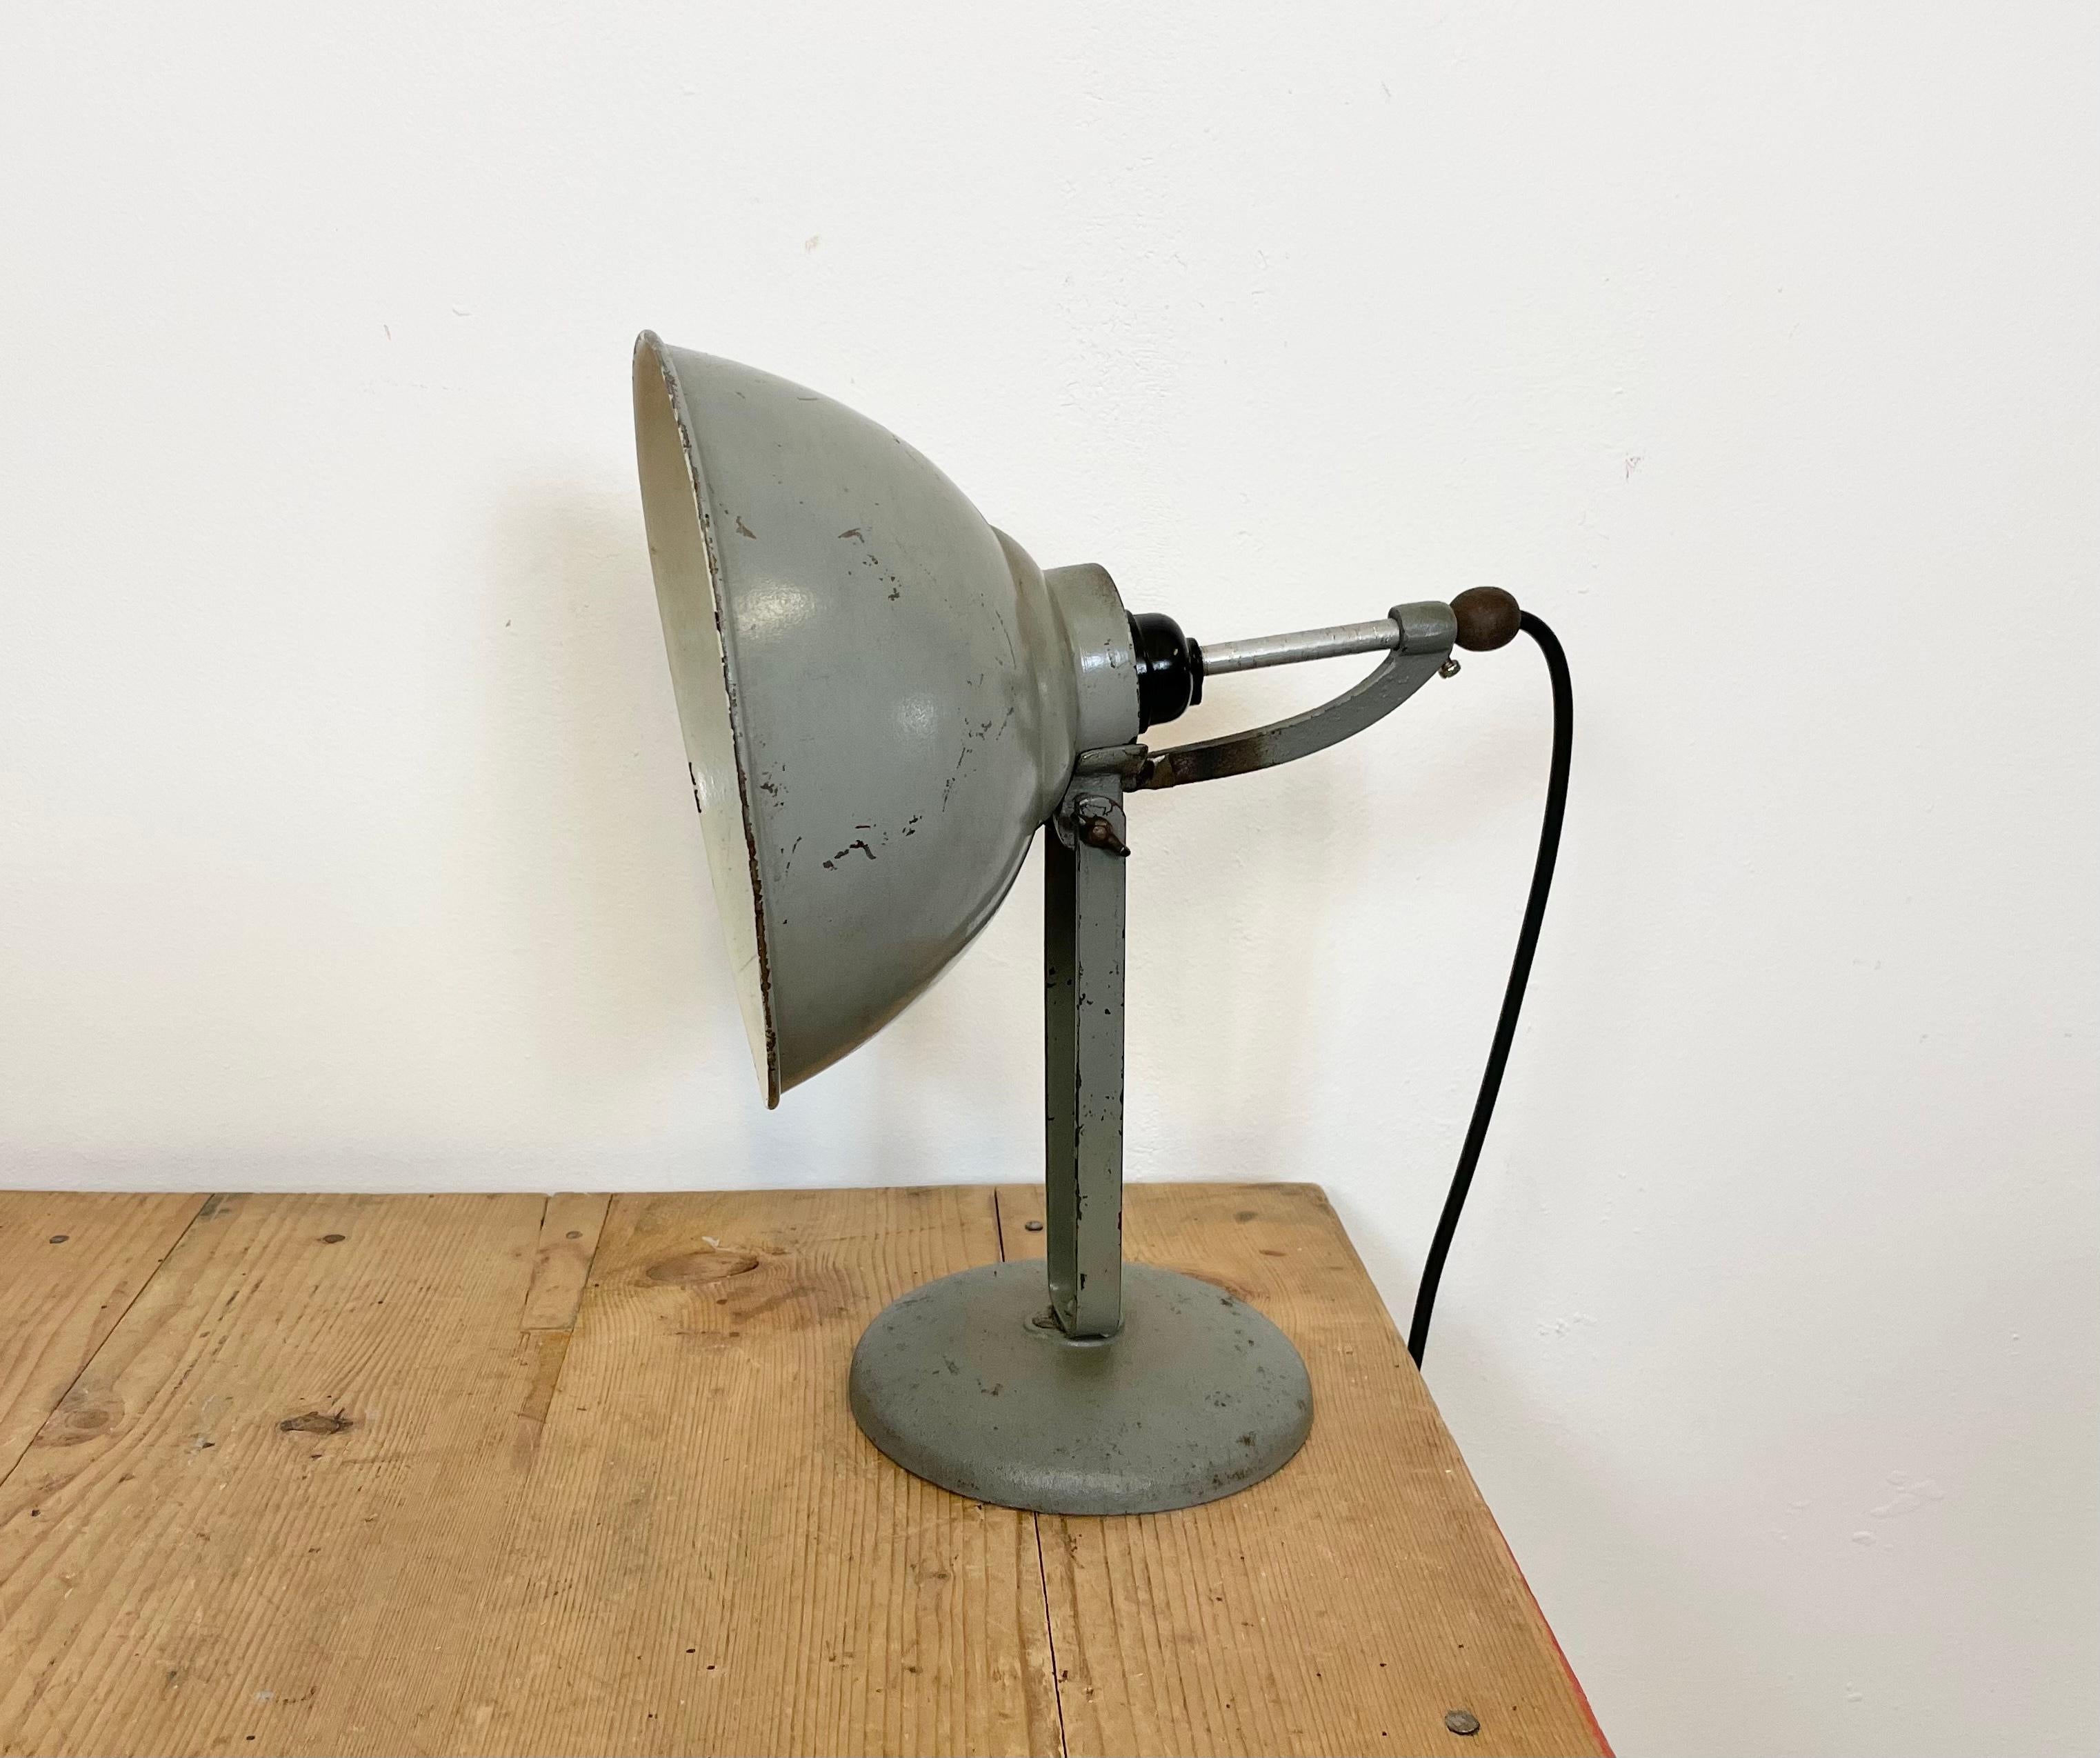 - Industrial table lamp manufactured in former Czechoslovakia during the 1970s
- Cast Iron base and adjustable iron shade
- Porcelain socket requires E 27 light bulbs
- New wire
- The weight of the lamp is 1,2 kg.